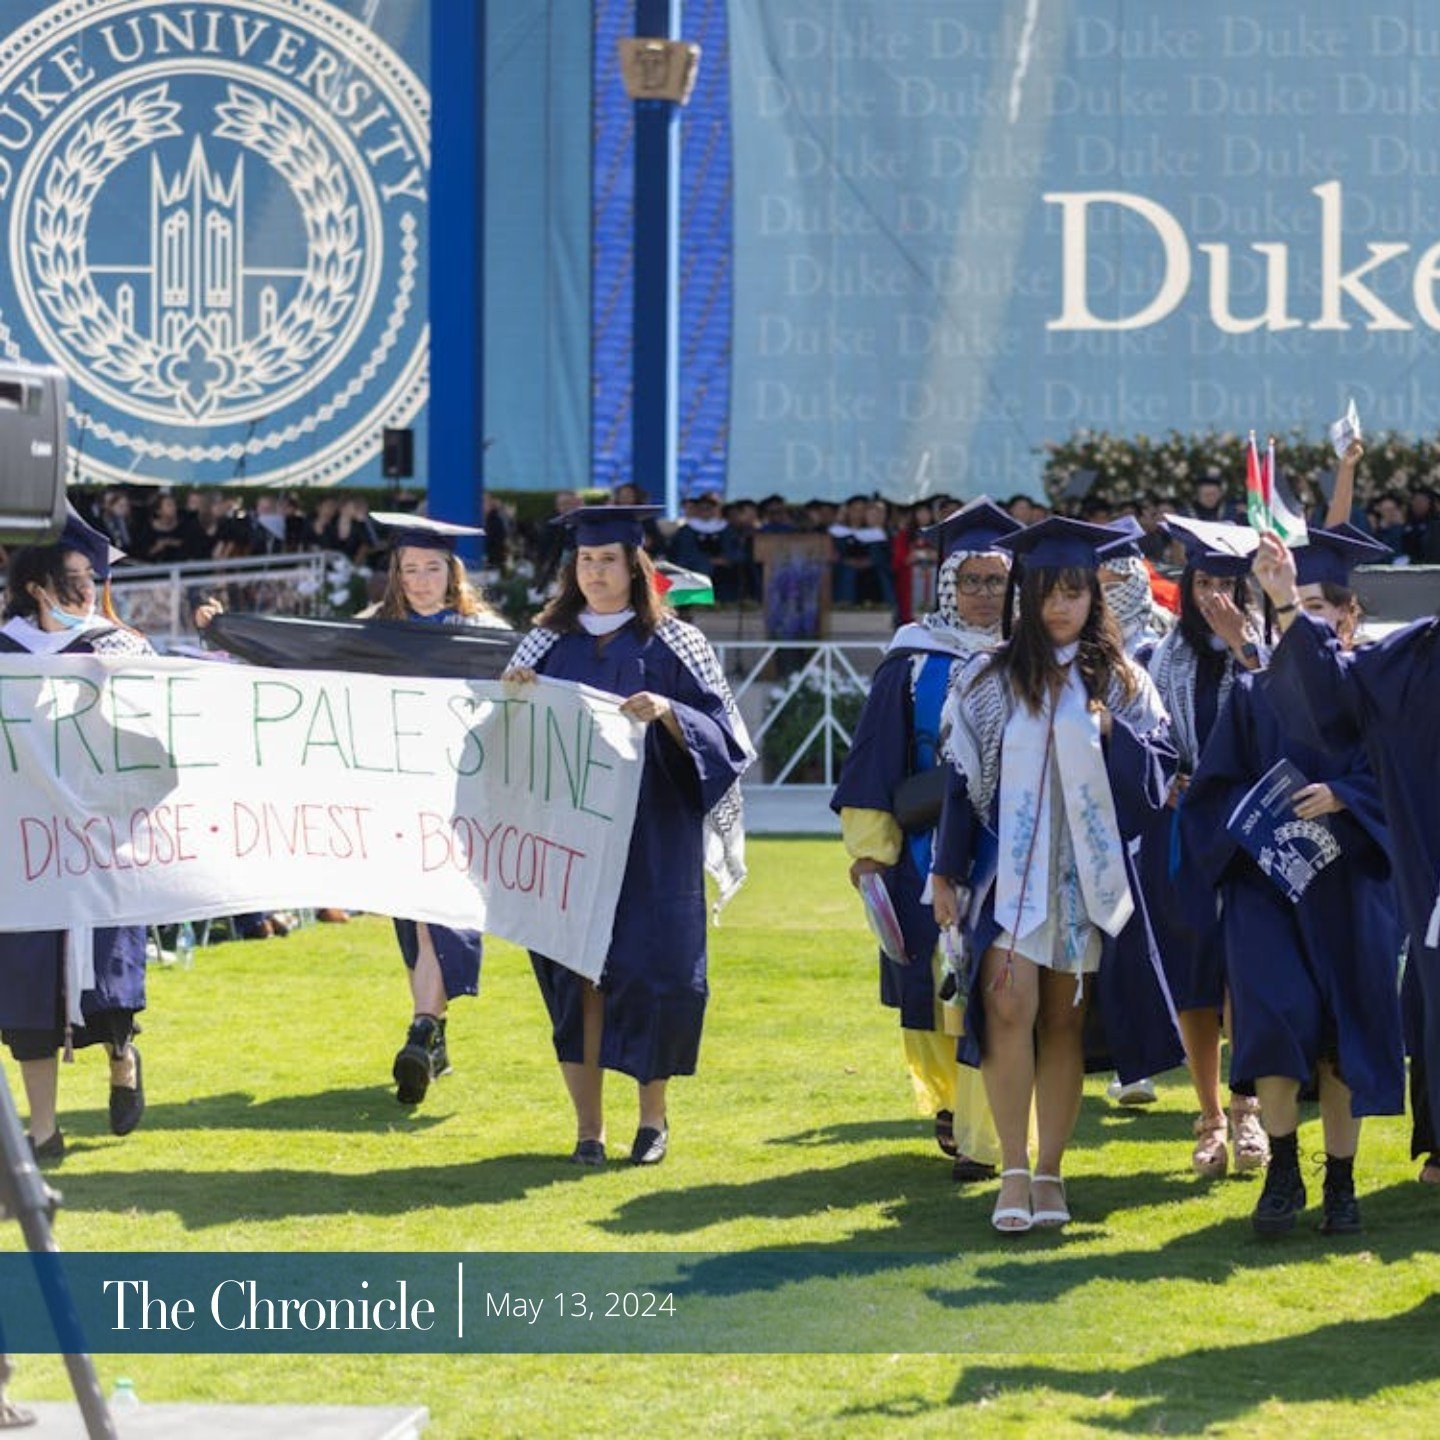 Early Sunday, graduating students filed into Wallace Wade as scheduled for Duke&rsquo;s Class of 2024 Commencement Ceremony. Attendees cheered on the graduates, many of whom did not have a traditional high school graduation due to the COVID-19 pandem